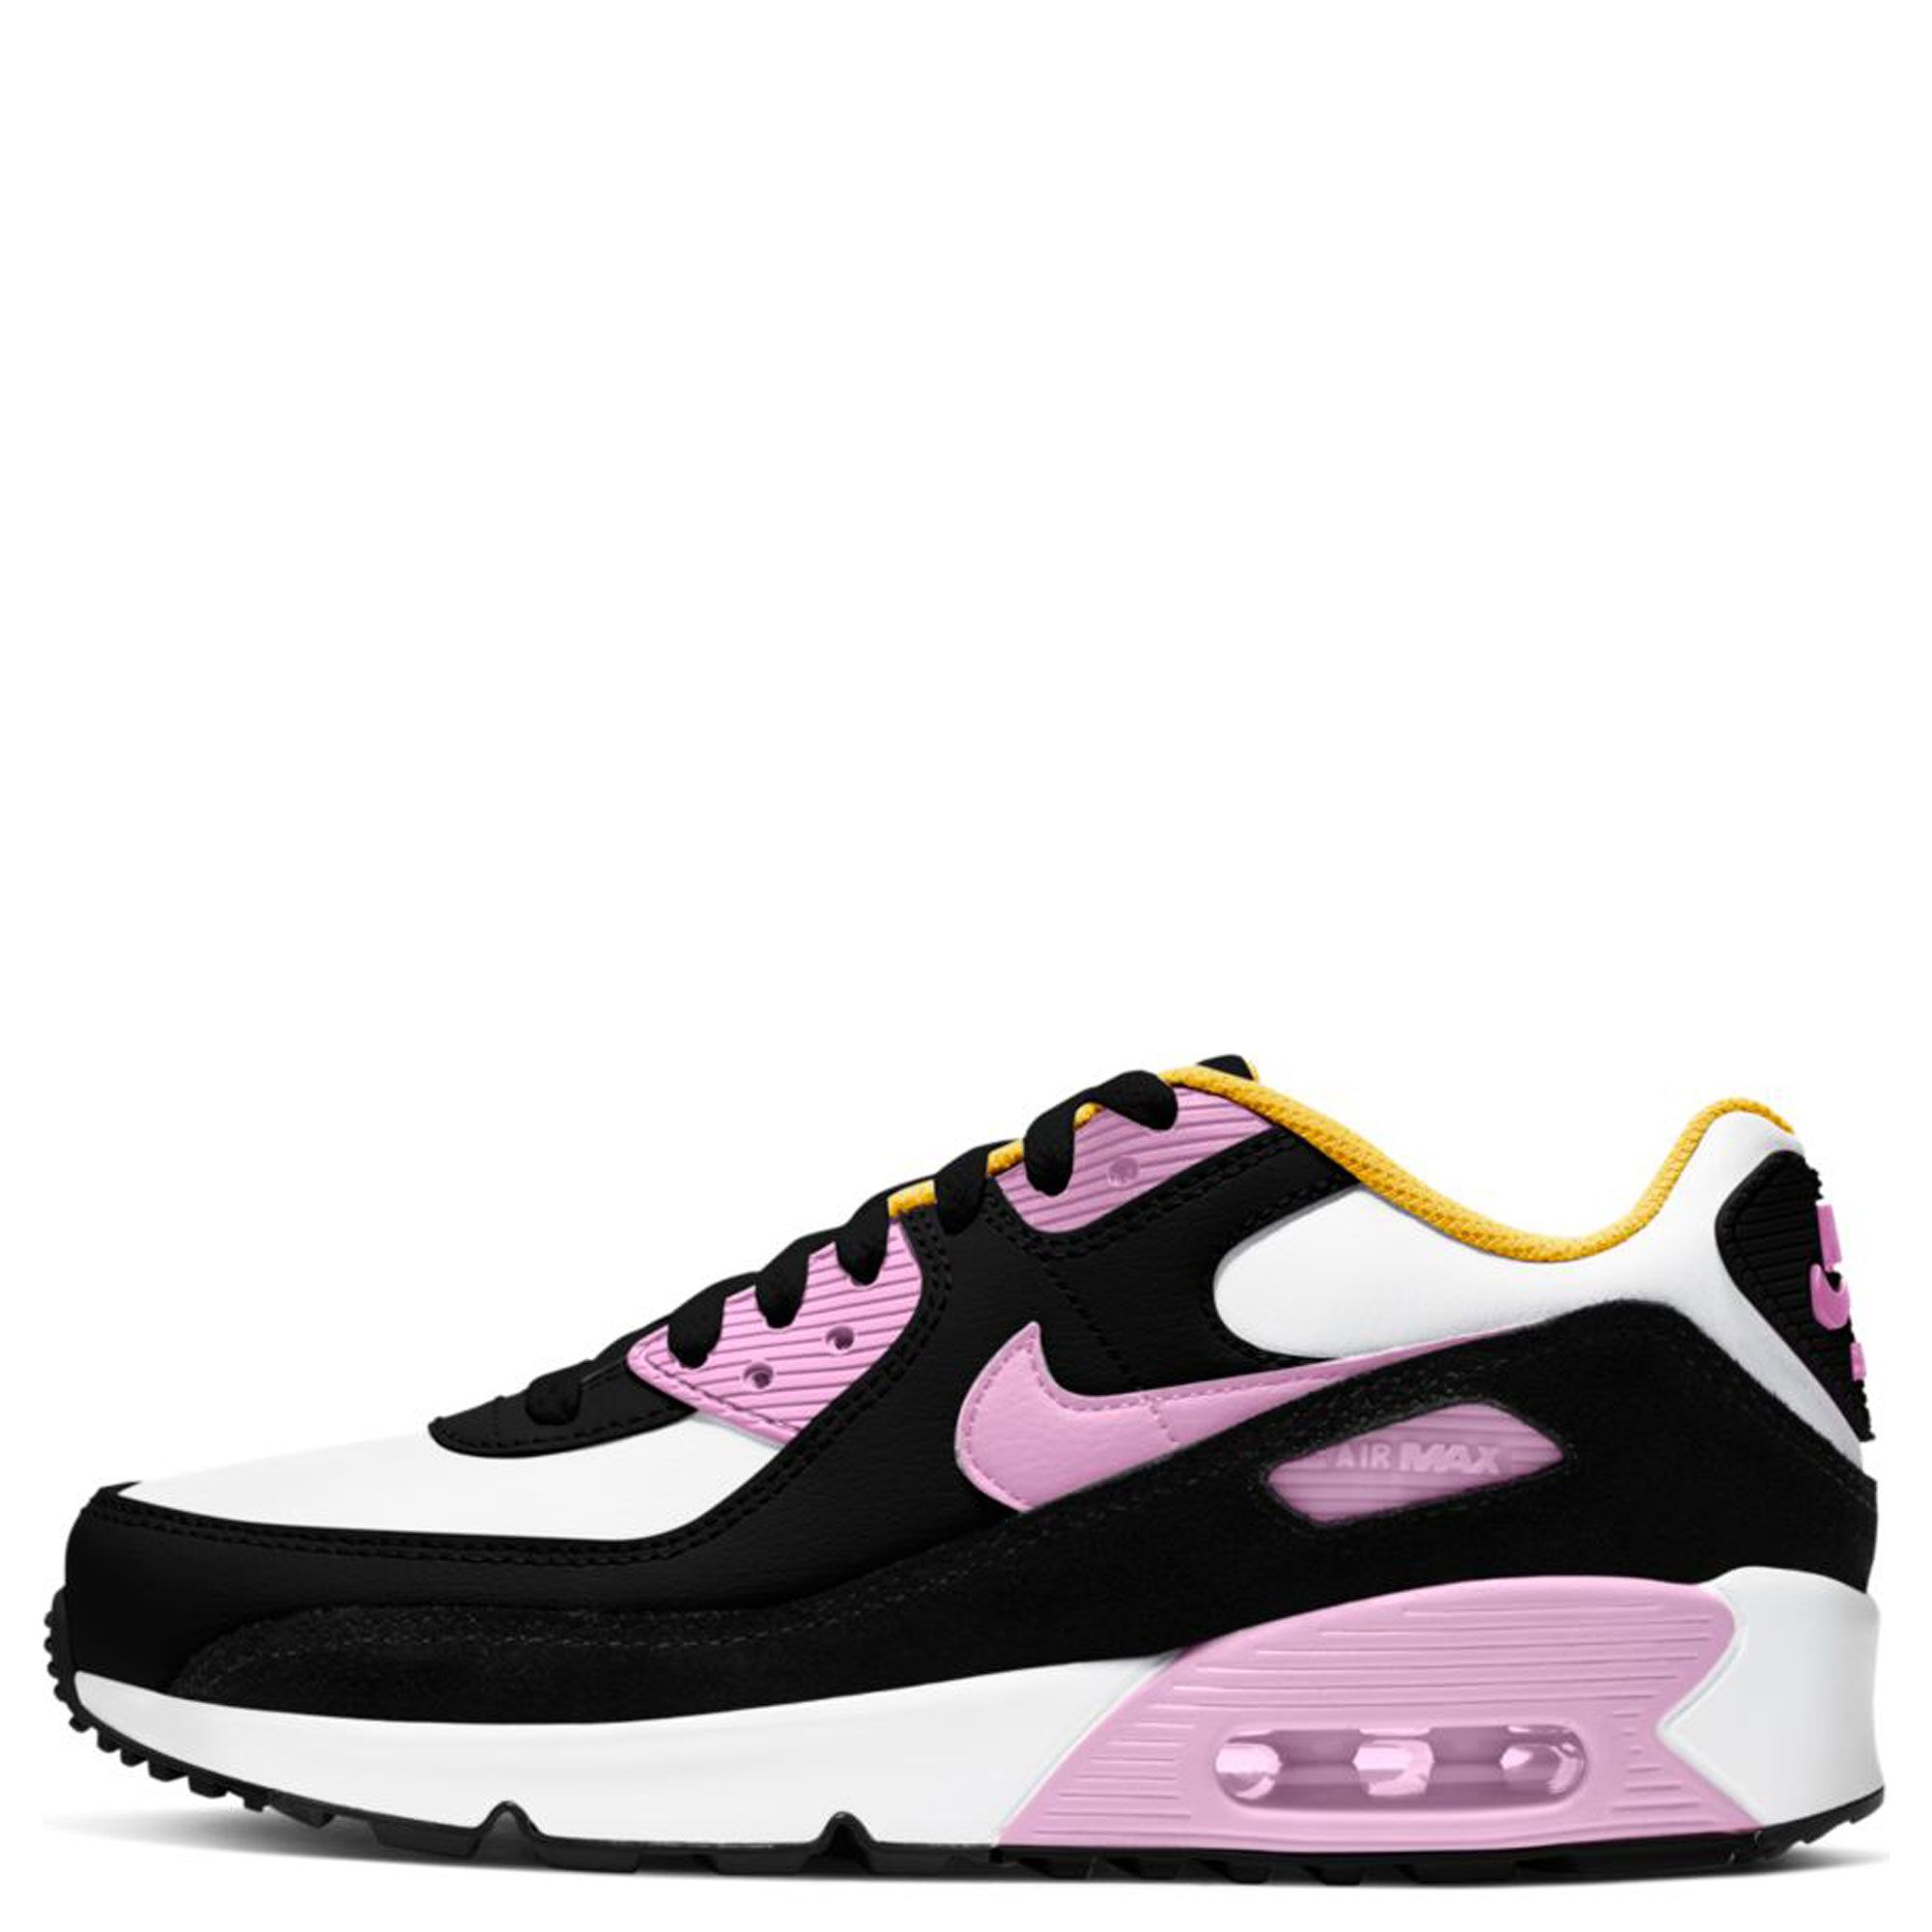 Nike Air Max 90 LTR Black/Pink Grade School Girls' Shoes, Size: 4.5